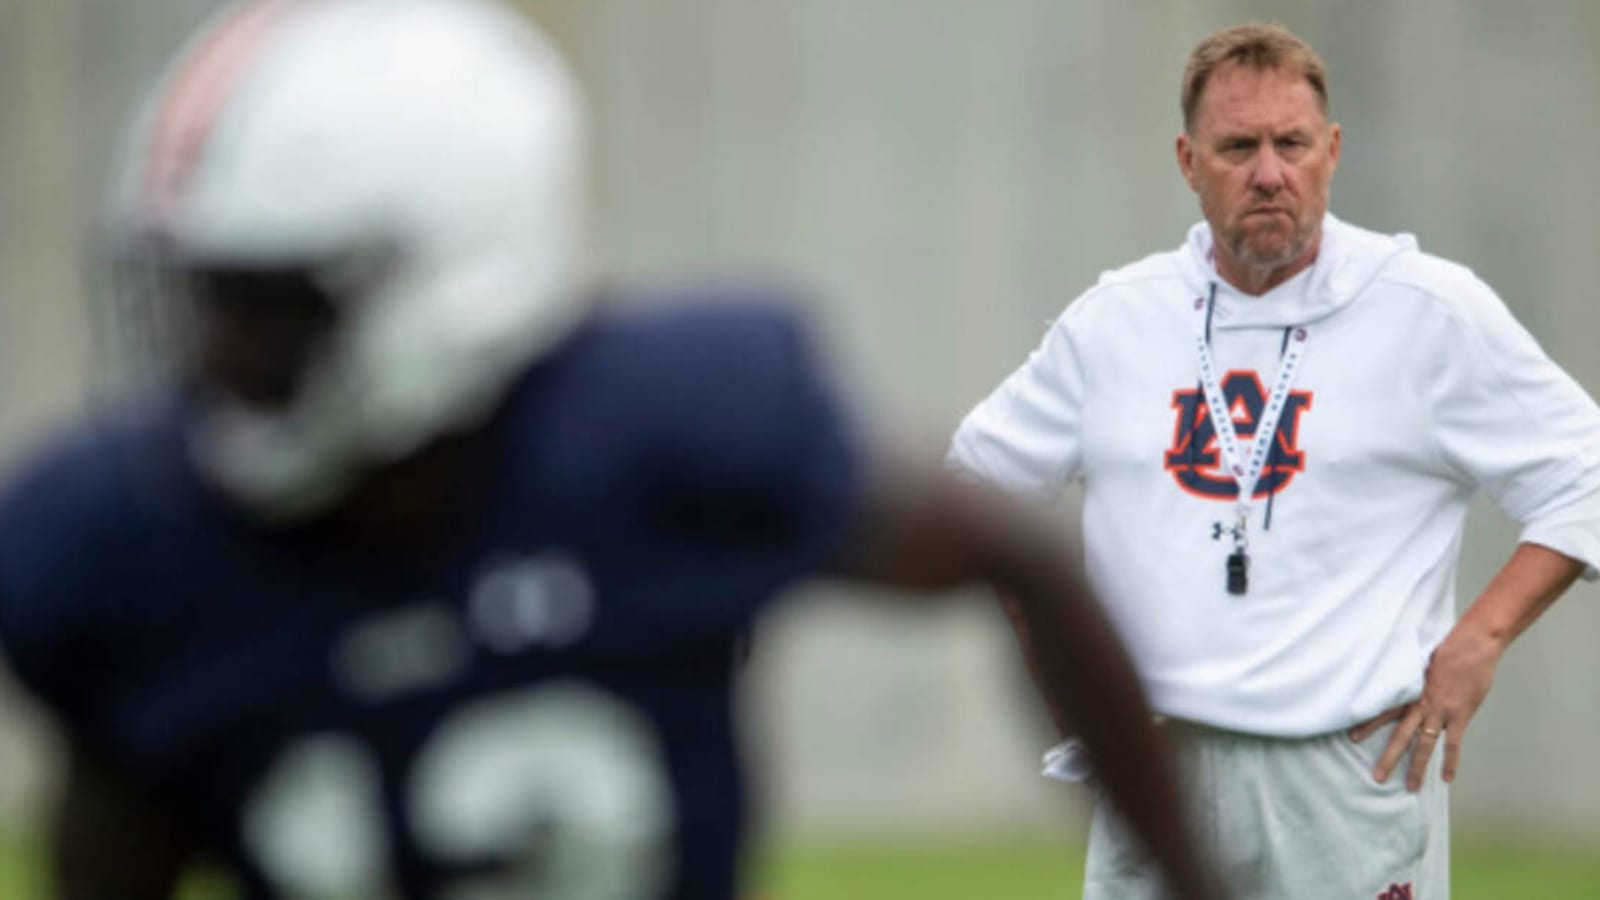 Auburn football DC hire comes with some controversy